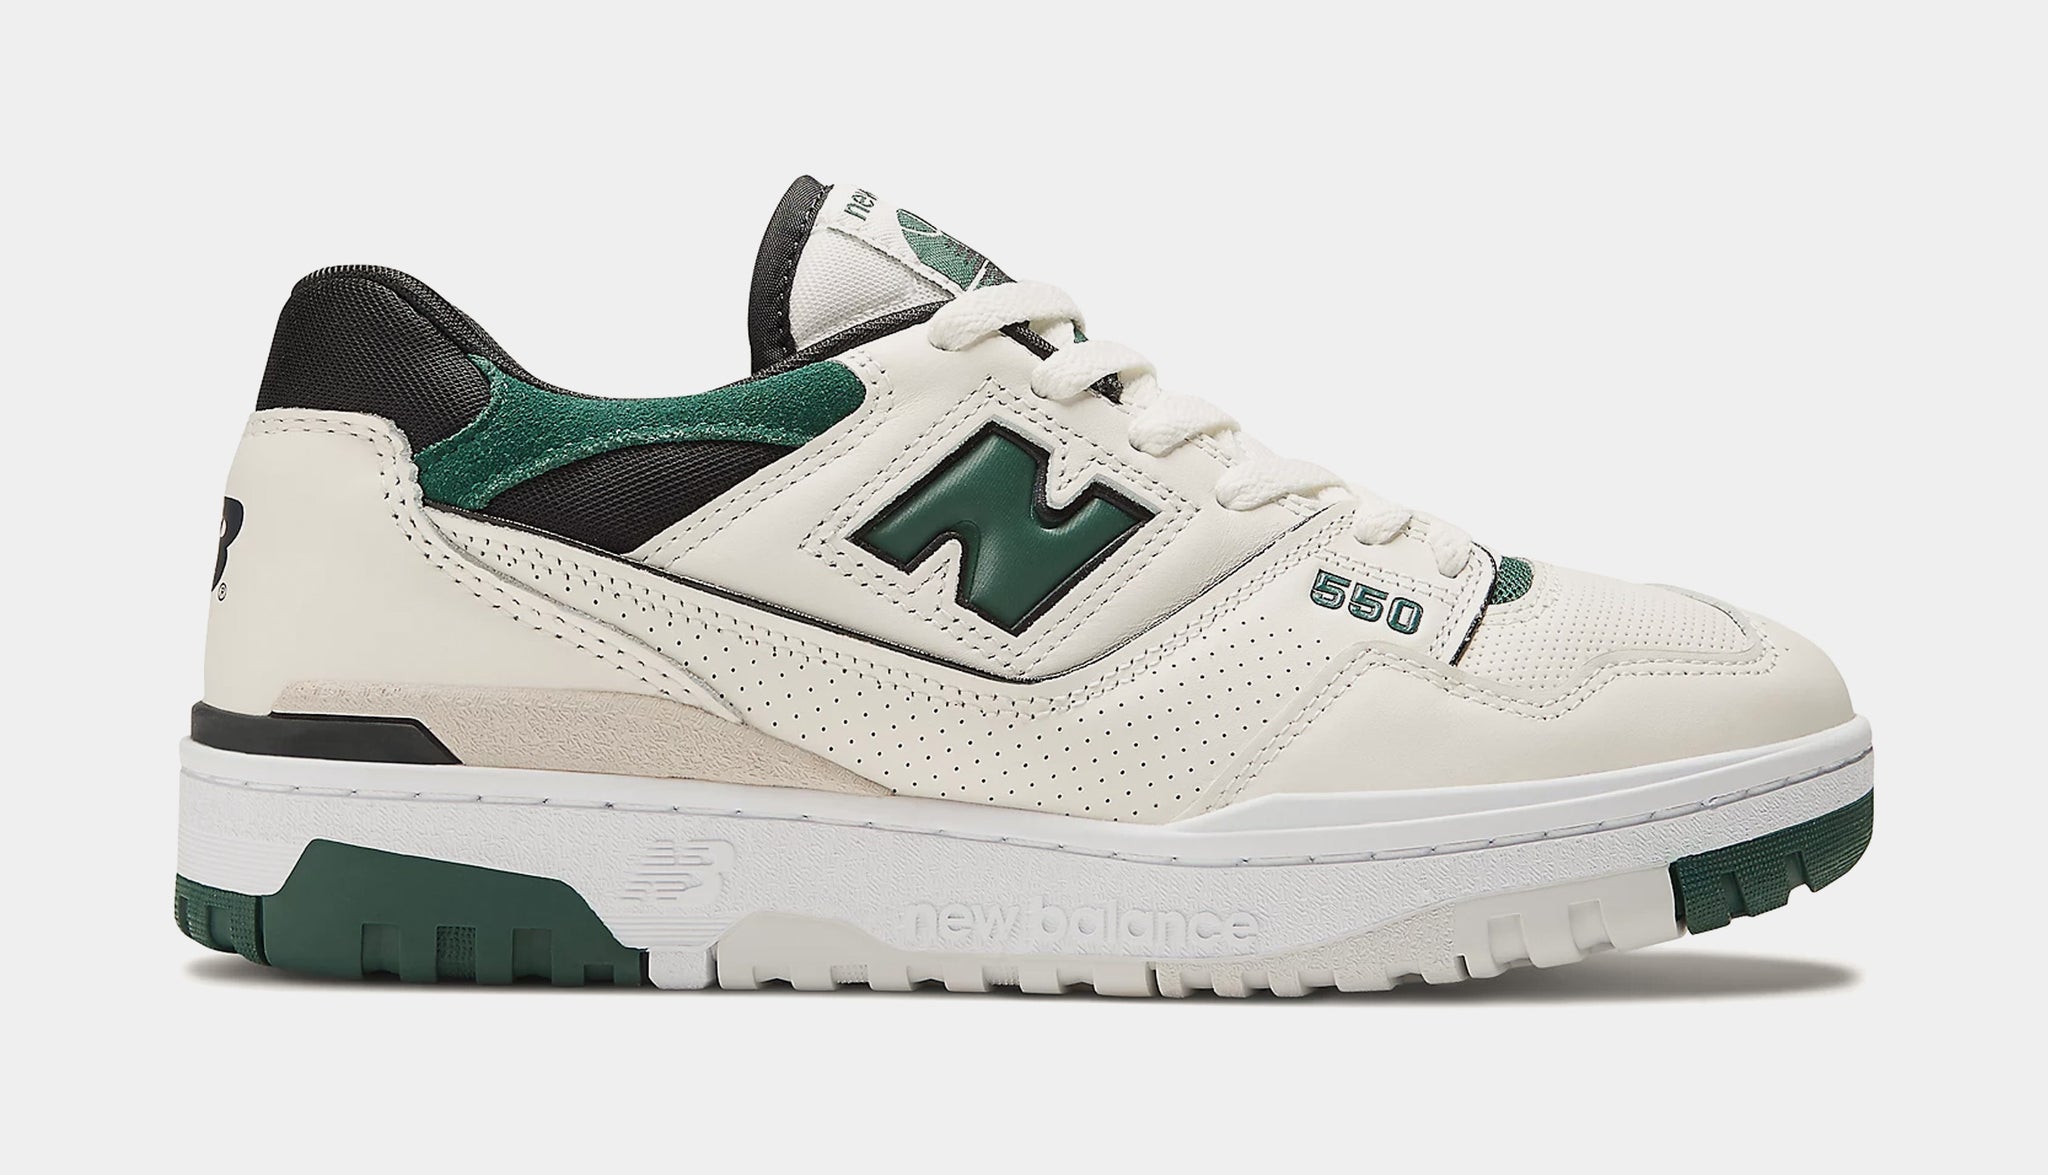 New Balance 550 White Sneakers